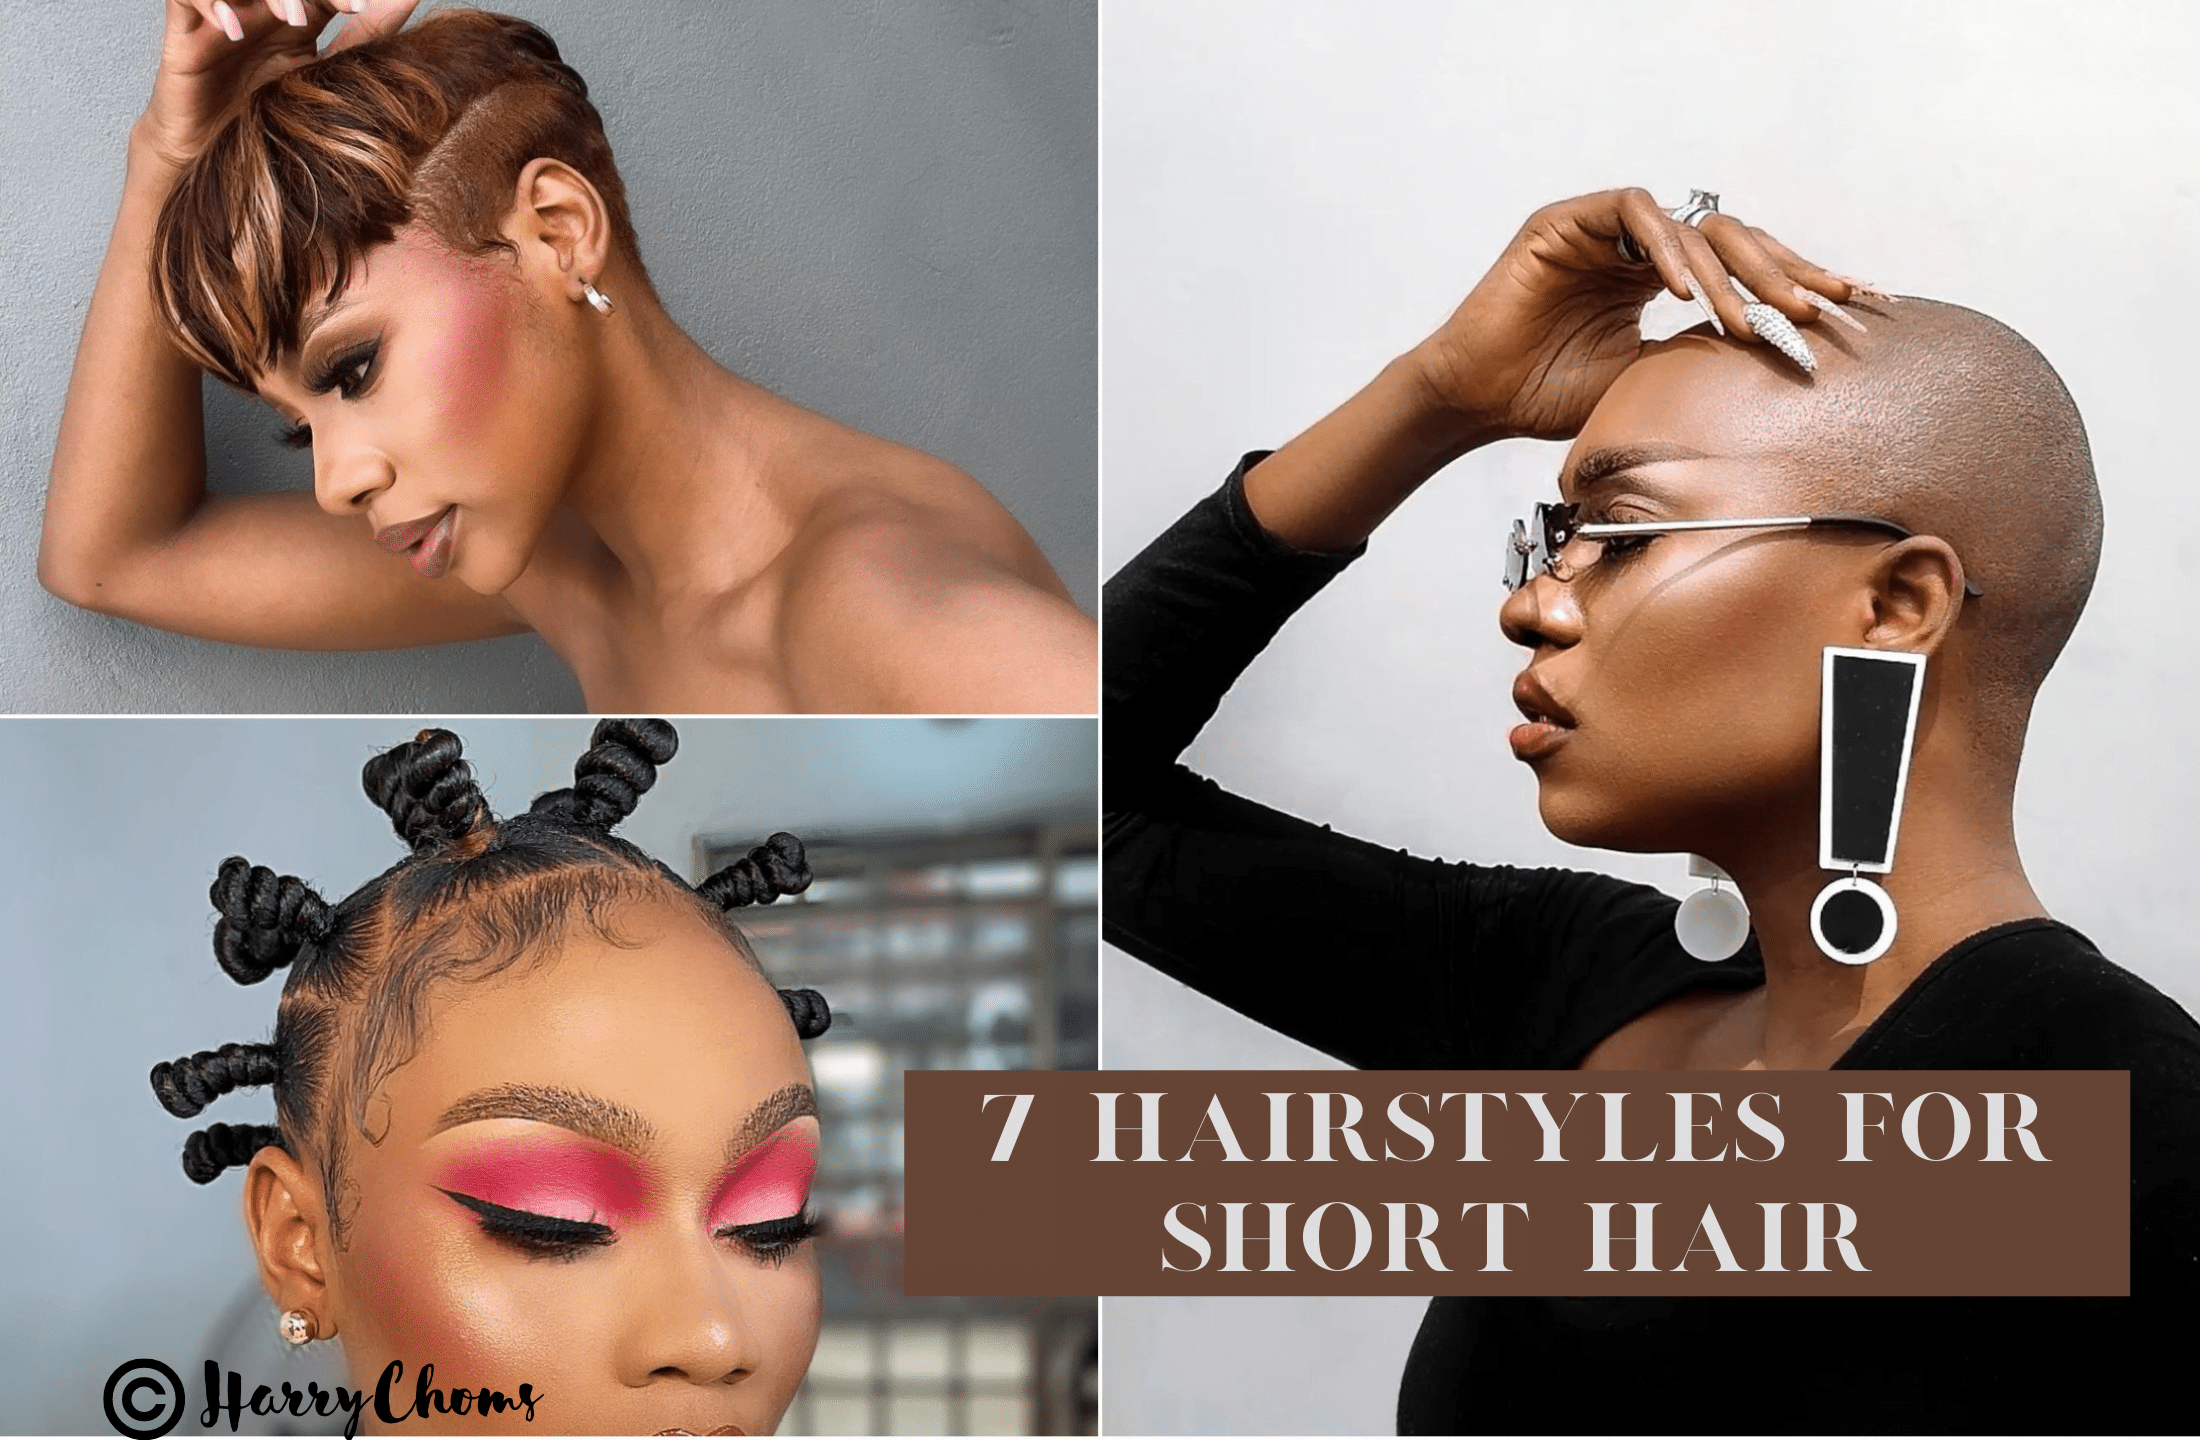 7 Hairstyles for short hair with significant impact - Kemi Filani